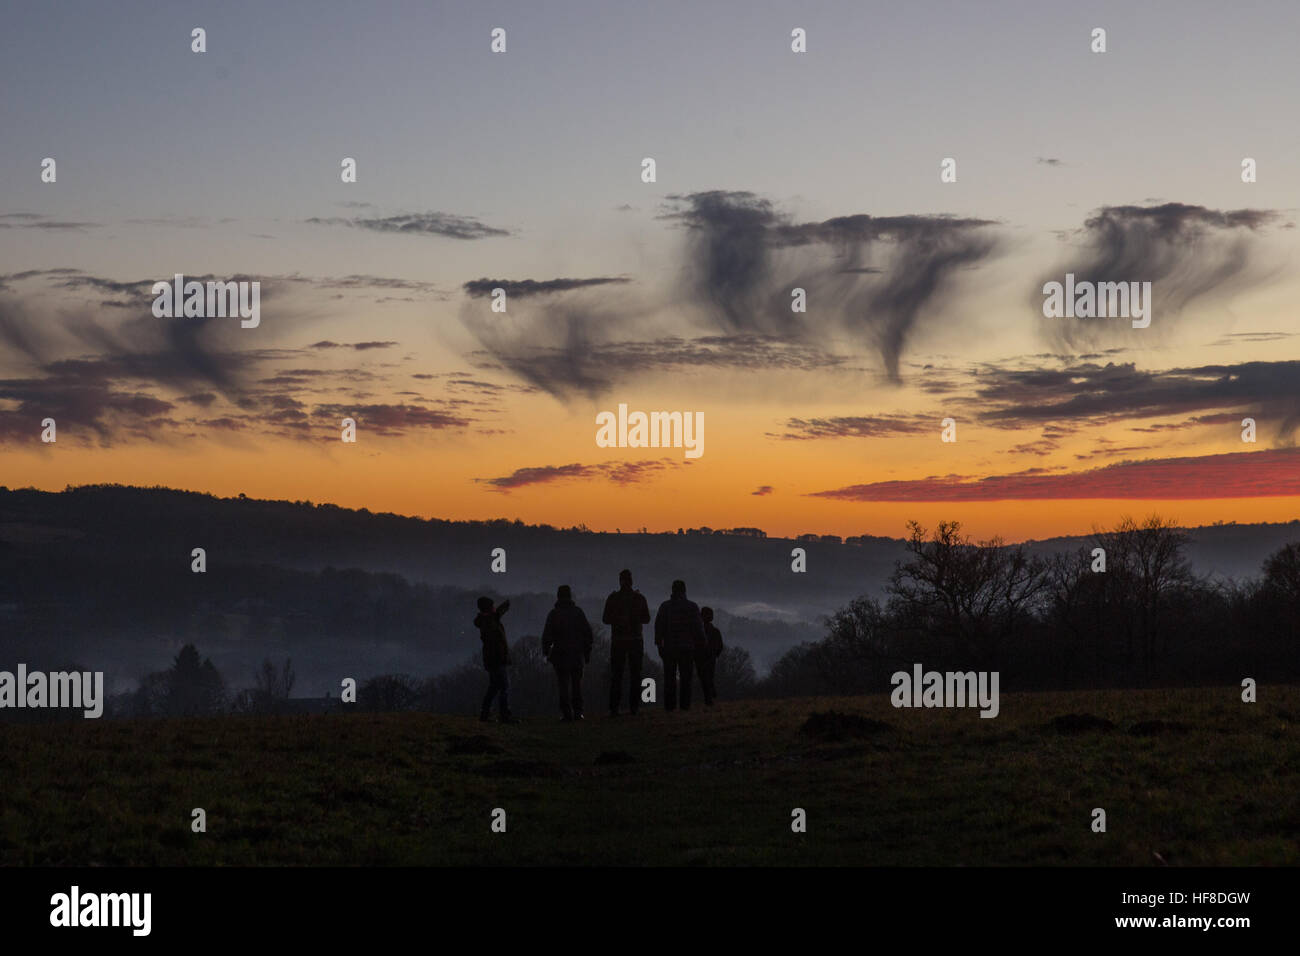 Sunset over the Ashdown Forest in Sussex, today 28th December 2016. The cold conditions brought on a show of clouds showing virga or 'fallstreaks' as ice or snow fell and evapourated as it hit a warmer layer of air. Credit: Chris Stevenson/Alamy Live News Stock Photo